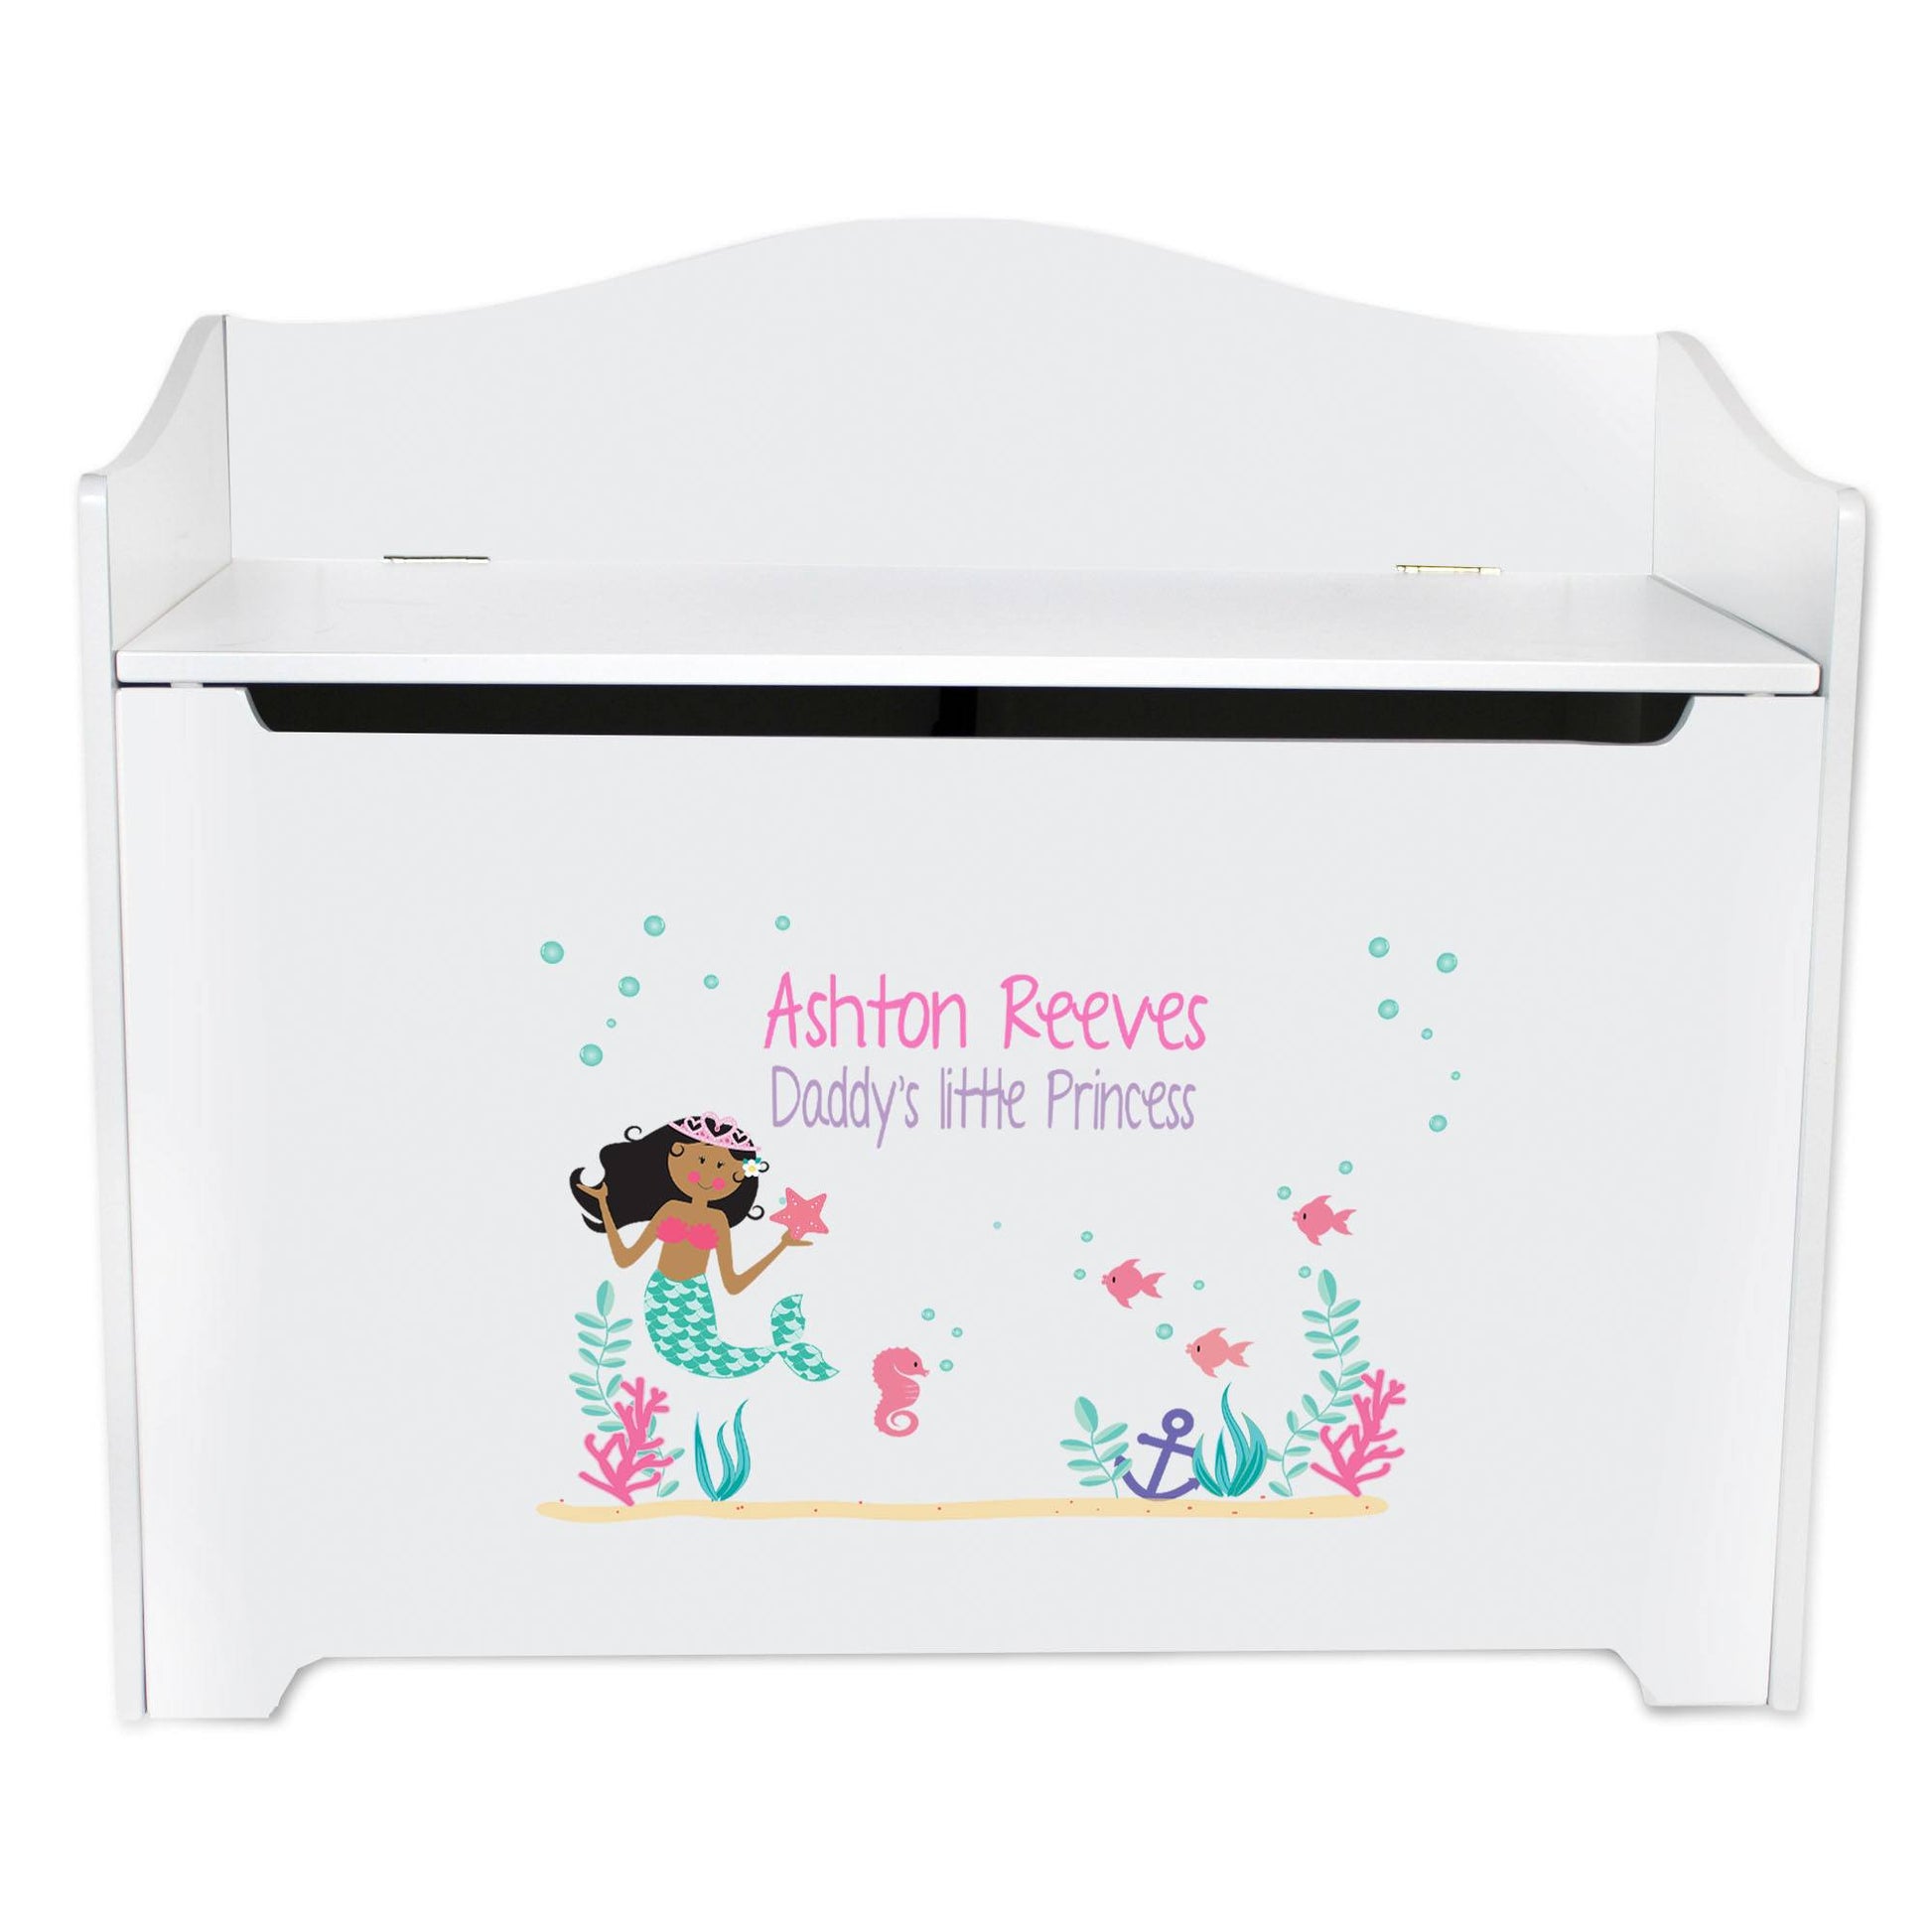 White Wooden Toy Box Bench with African American Mermaid Princess design